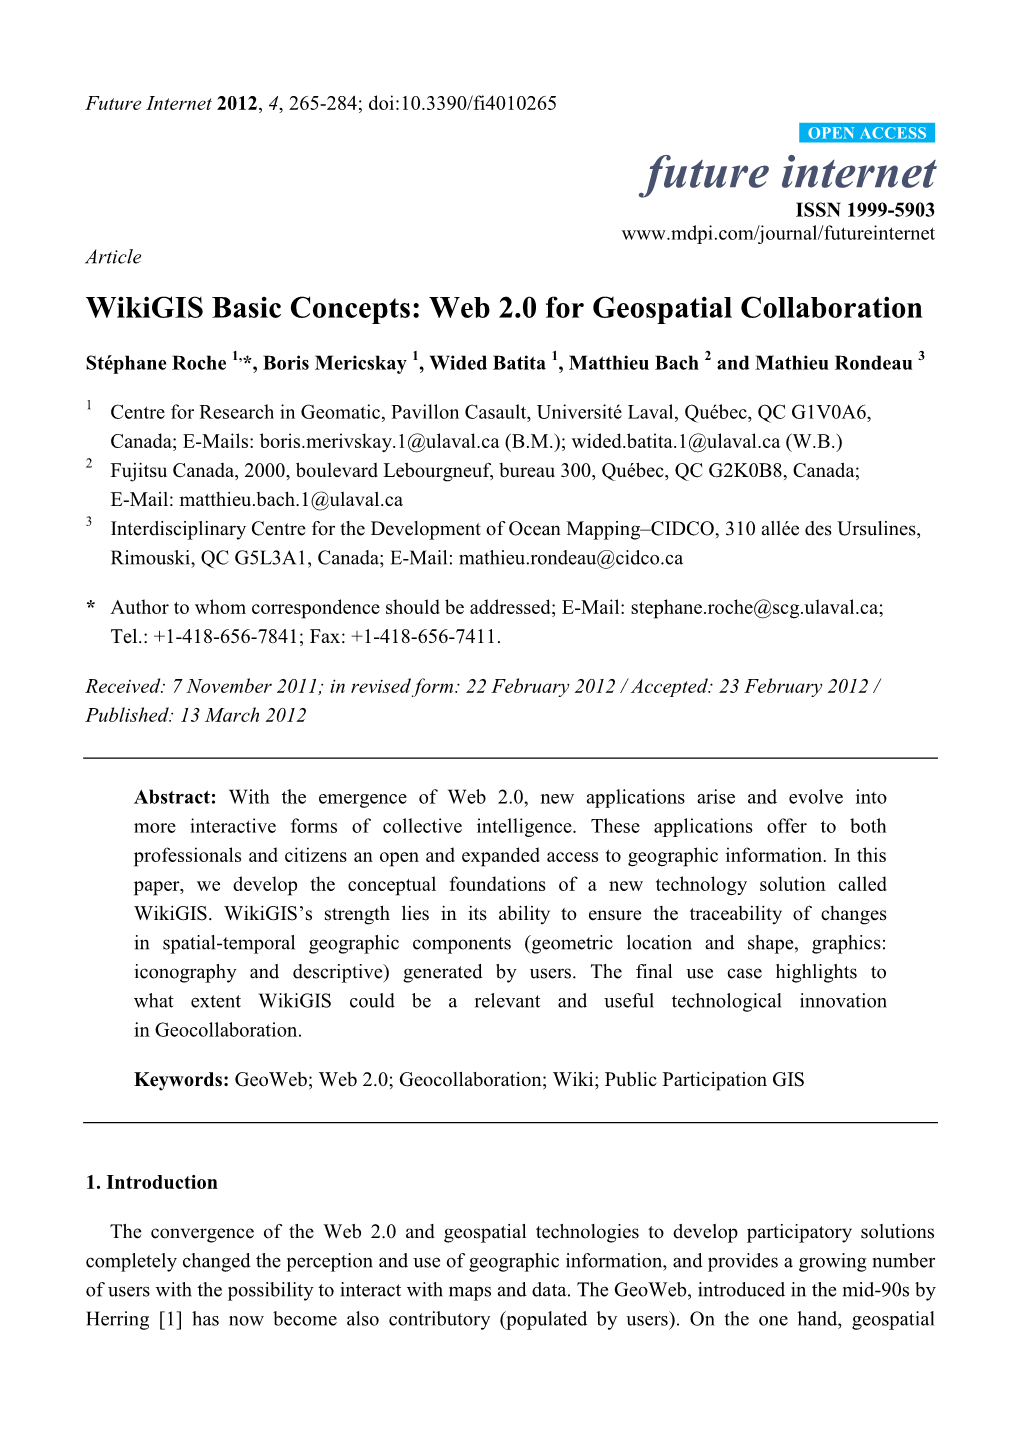 Wikigis Basic Concepts: Web 2.0 for Geospatial Collaboration